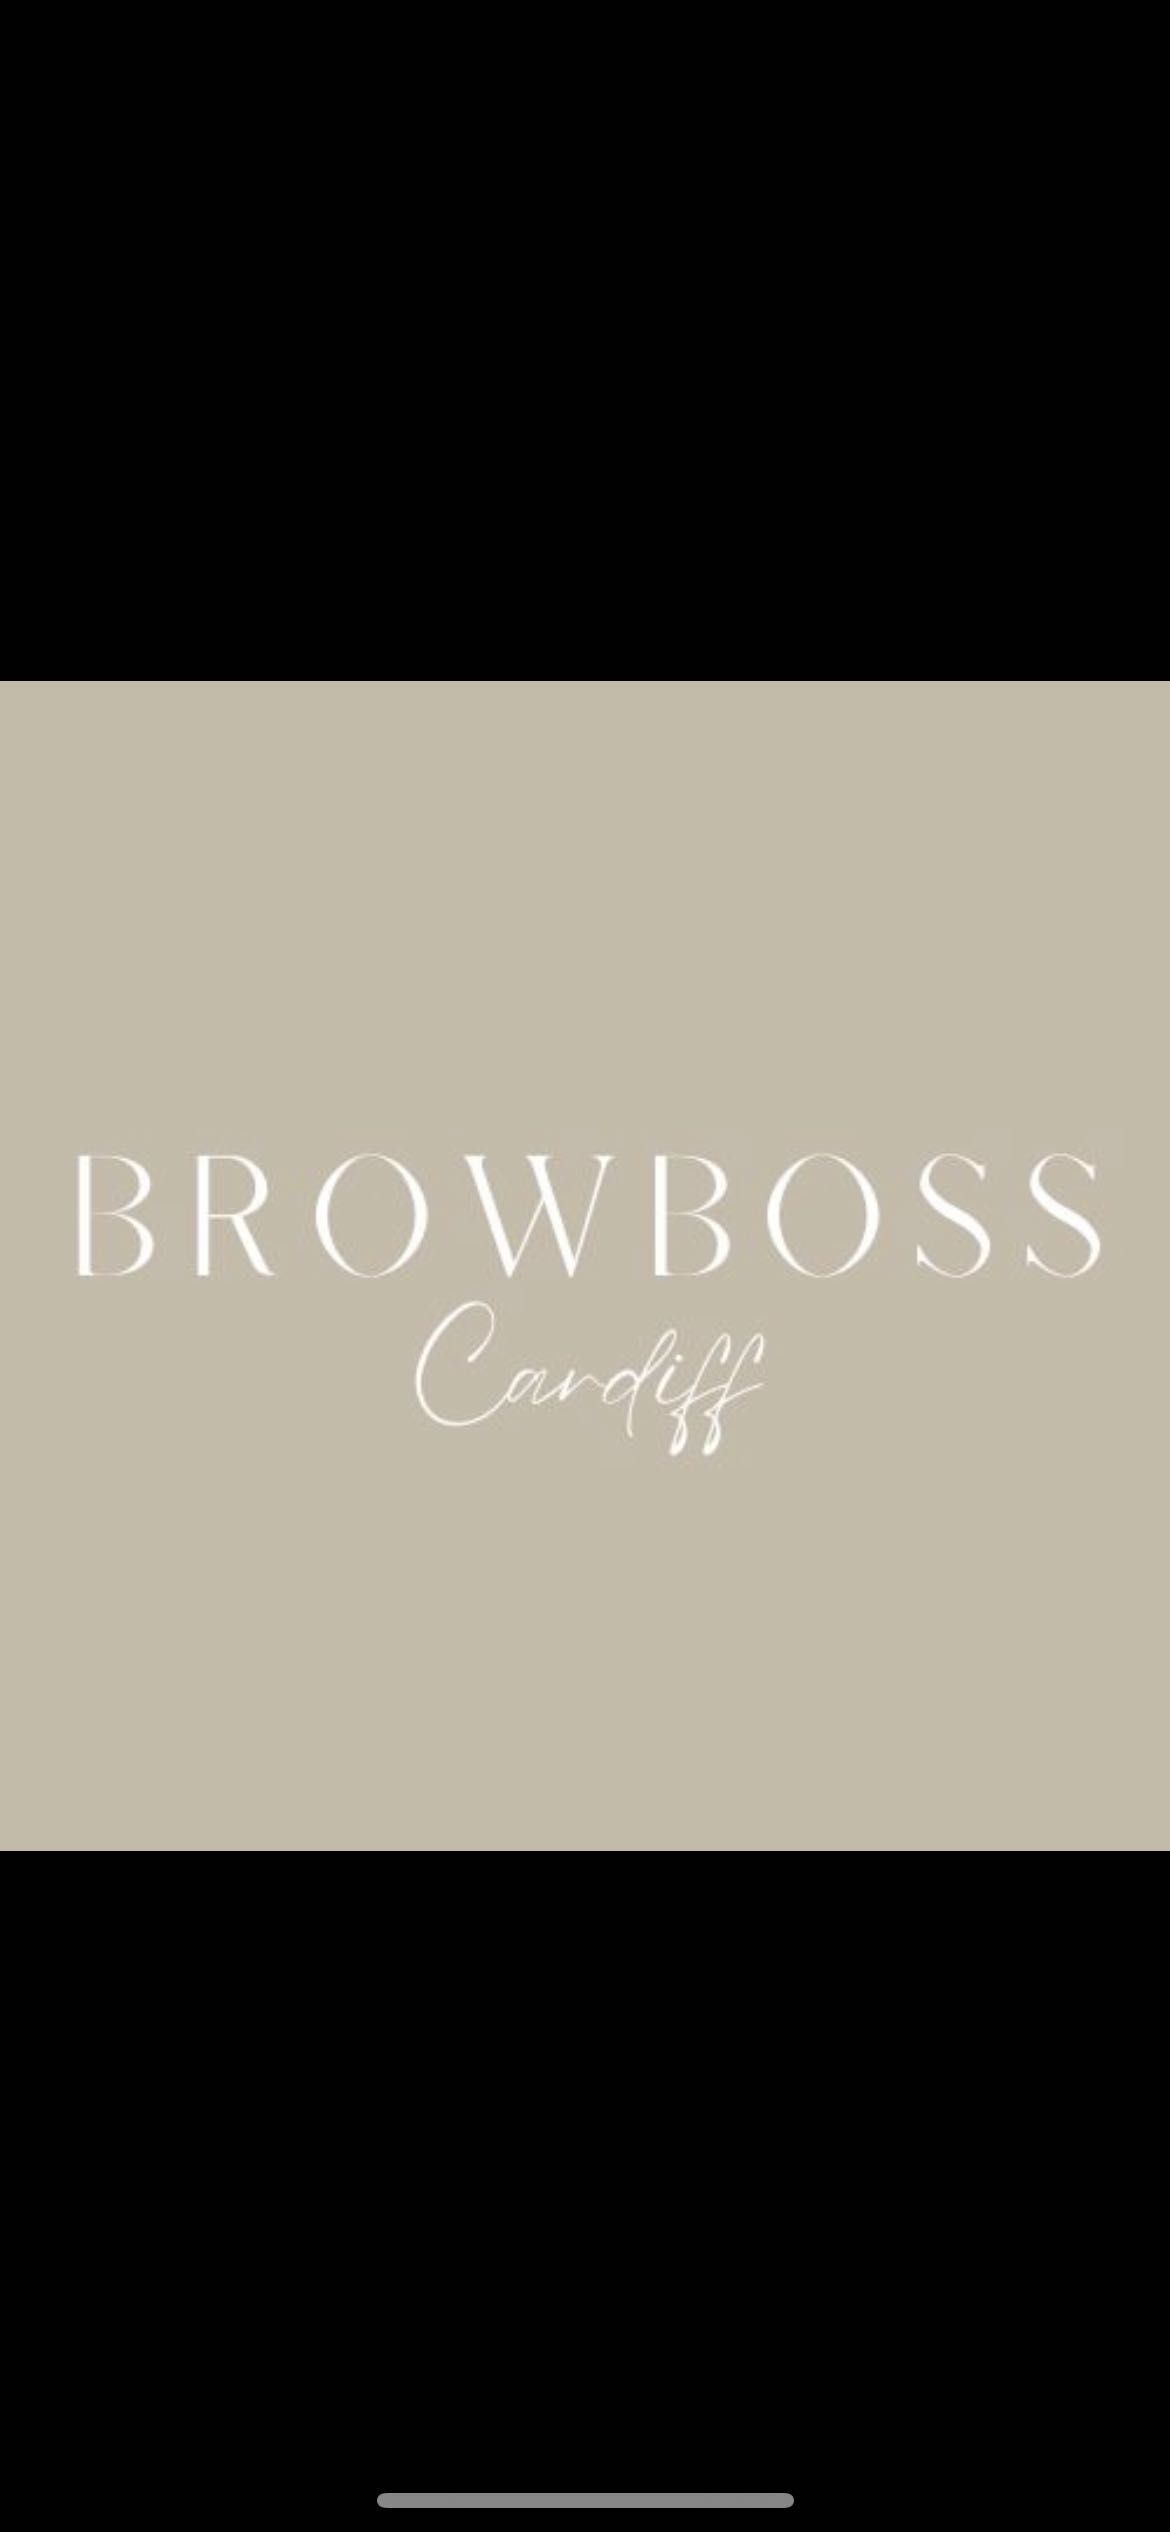 BROWBOSS Cardiff, 15 Meadowsweet Drive, St Mellons, CF3 0RD, Cardiff